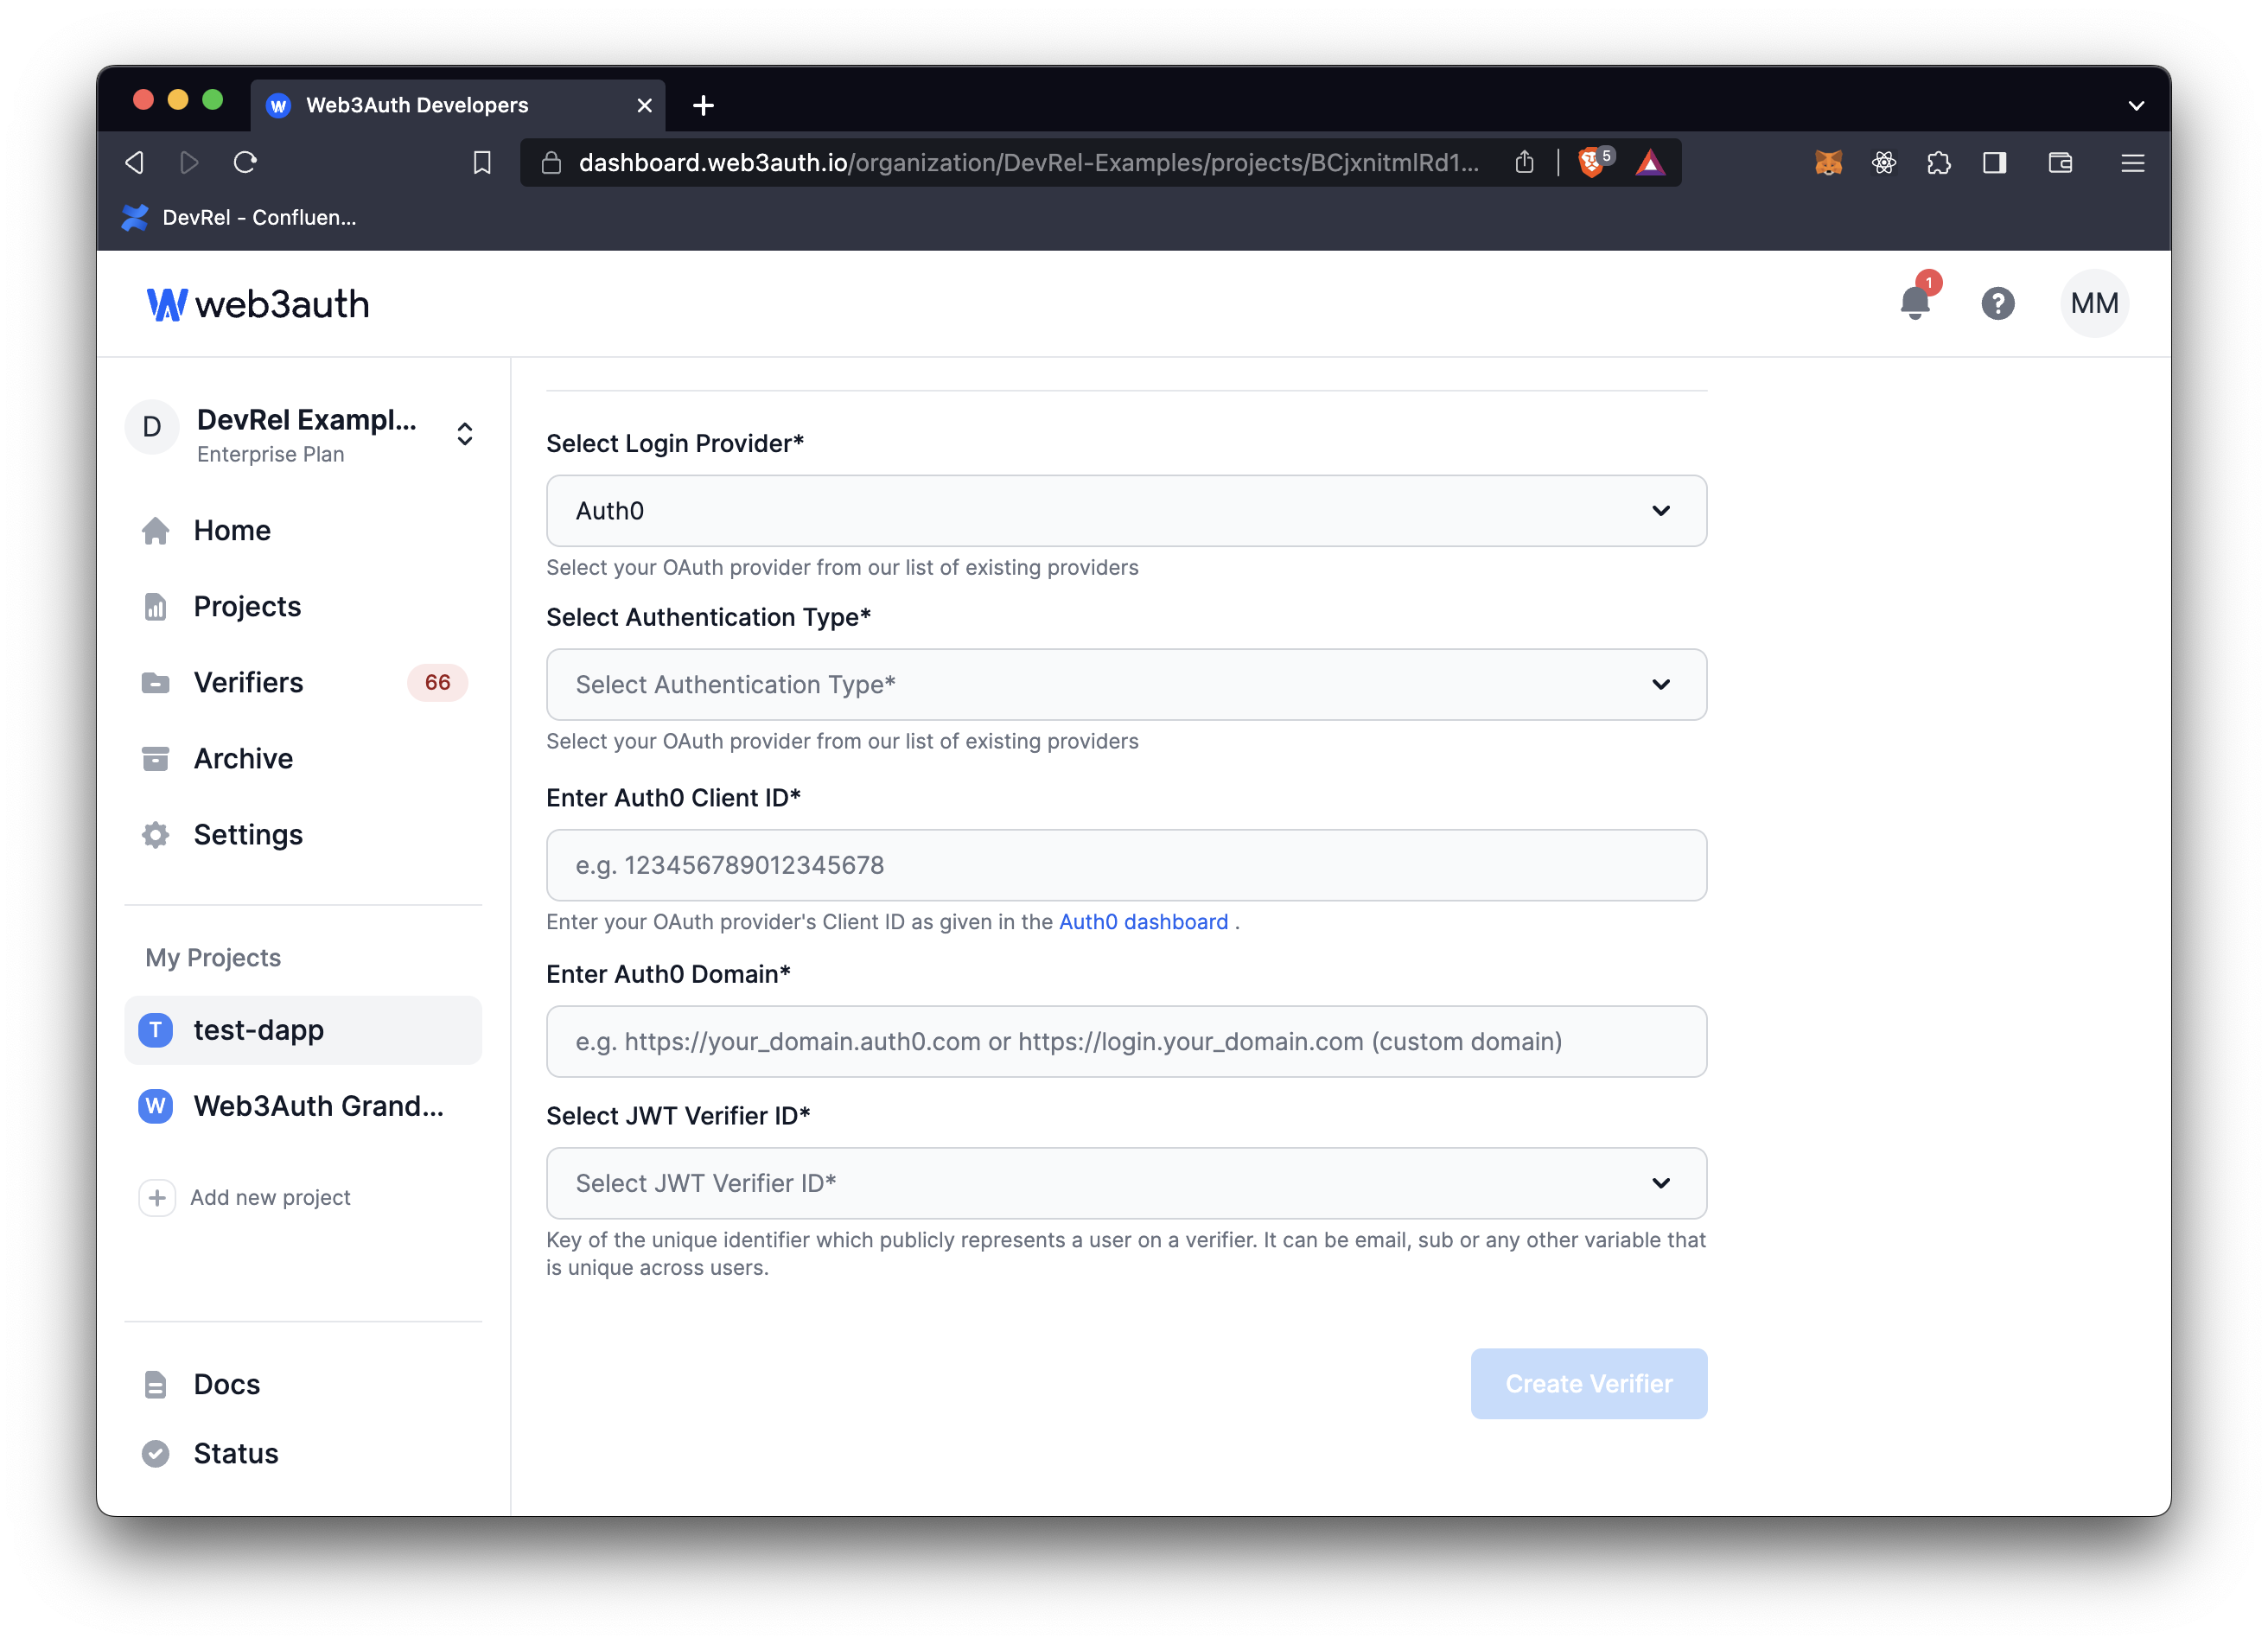 Twitter - Auth0 Client ID and Auth0 Domain on Web3Auth Dashboard